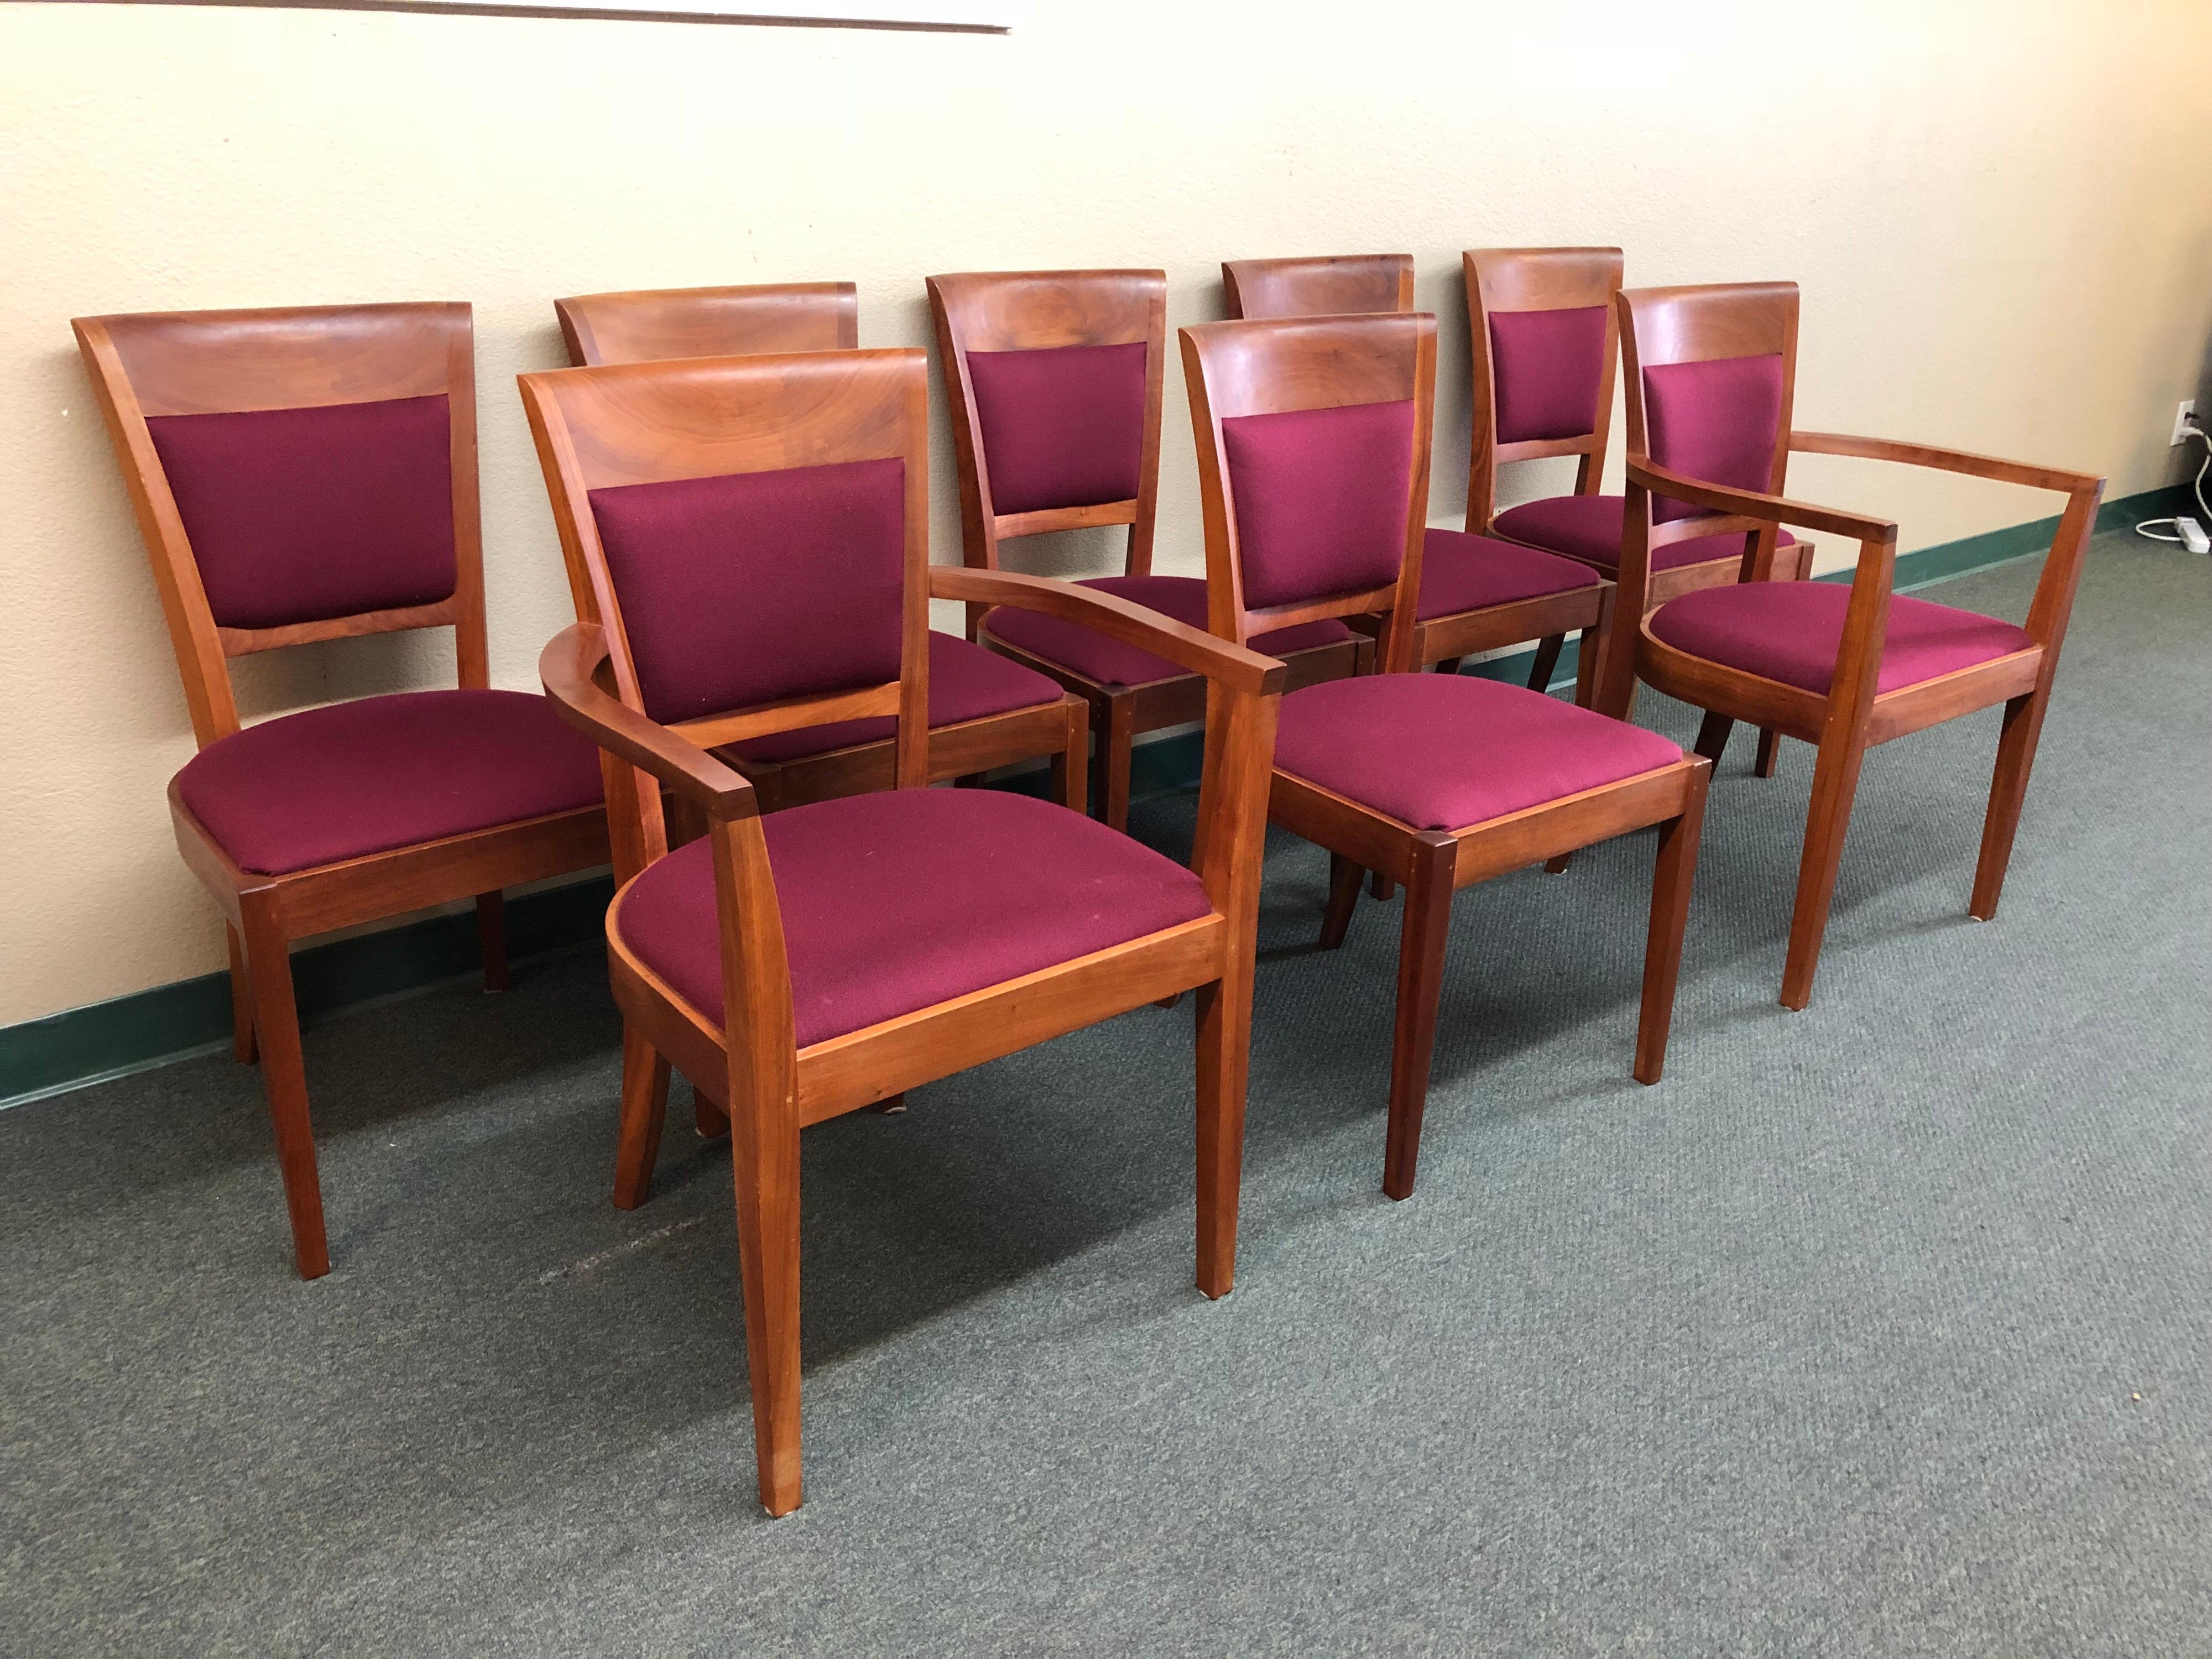 A set of eight Harpswell chairs. These chairs are named after Thomas Moser's home studio in Harpswell, Maine where they were designed. Included in the set are two Harpswell end chairs with back, and six Harpswell side chairs with back. All are in